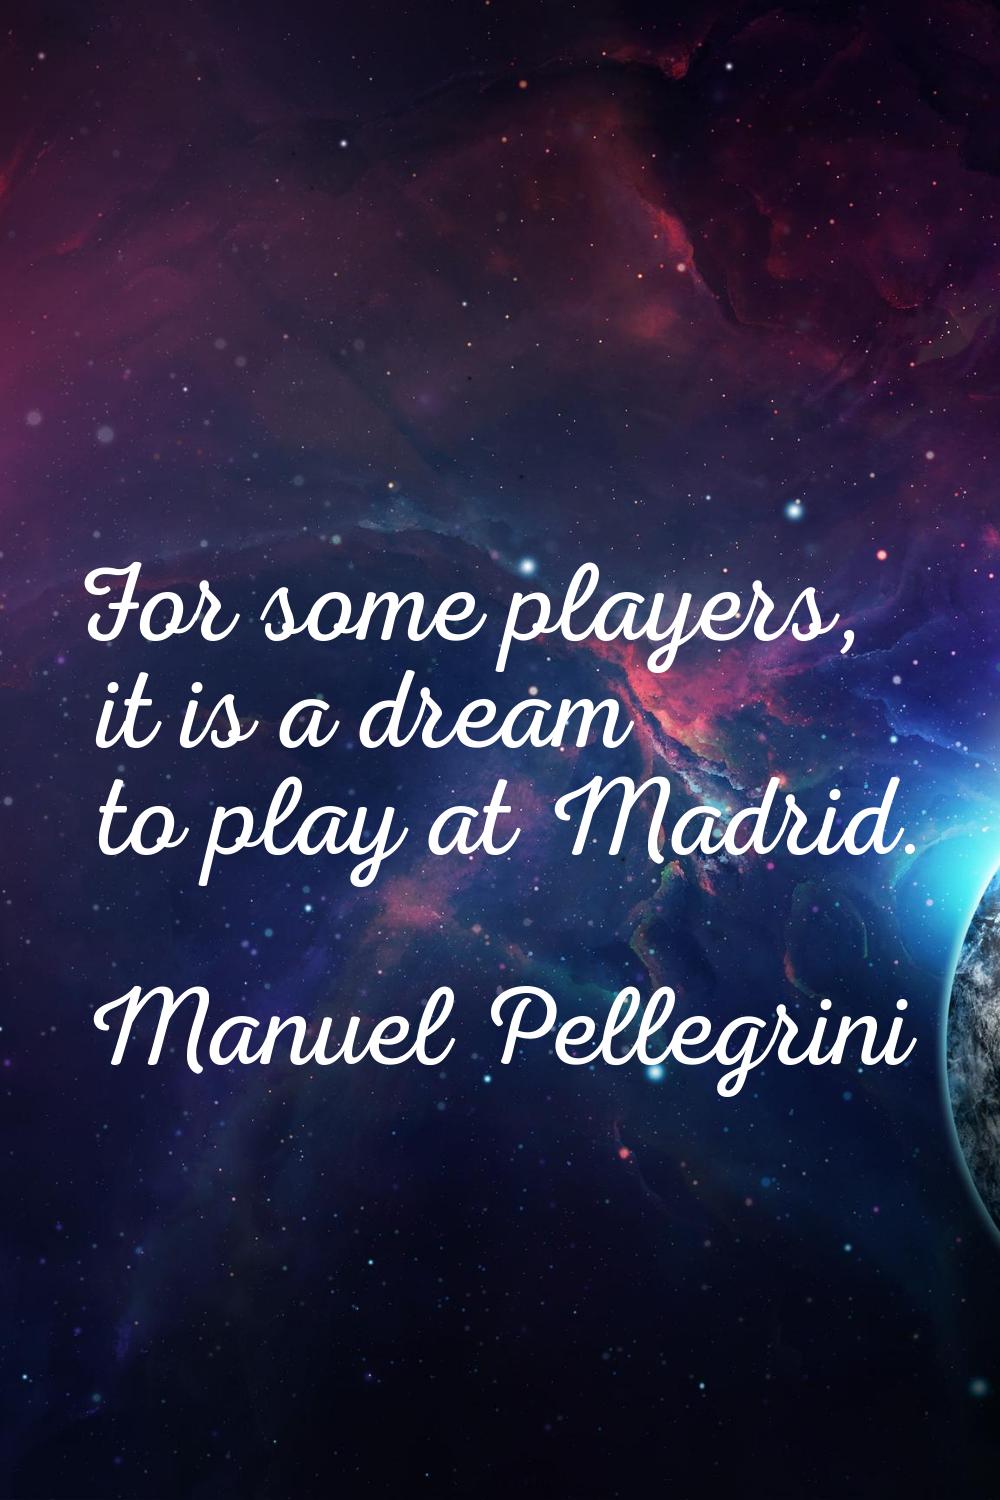 For some players, it is a dream to play at Madrid.